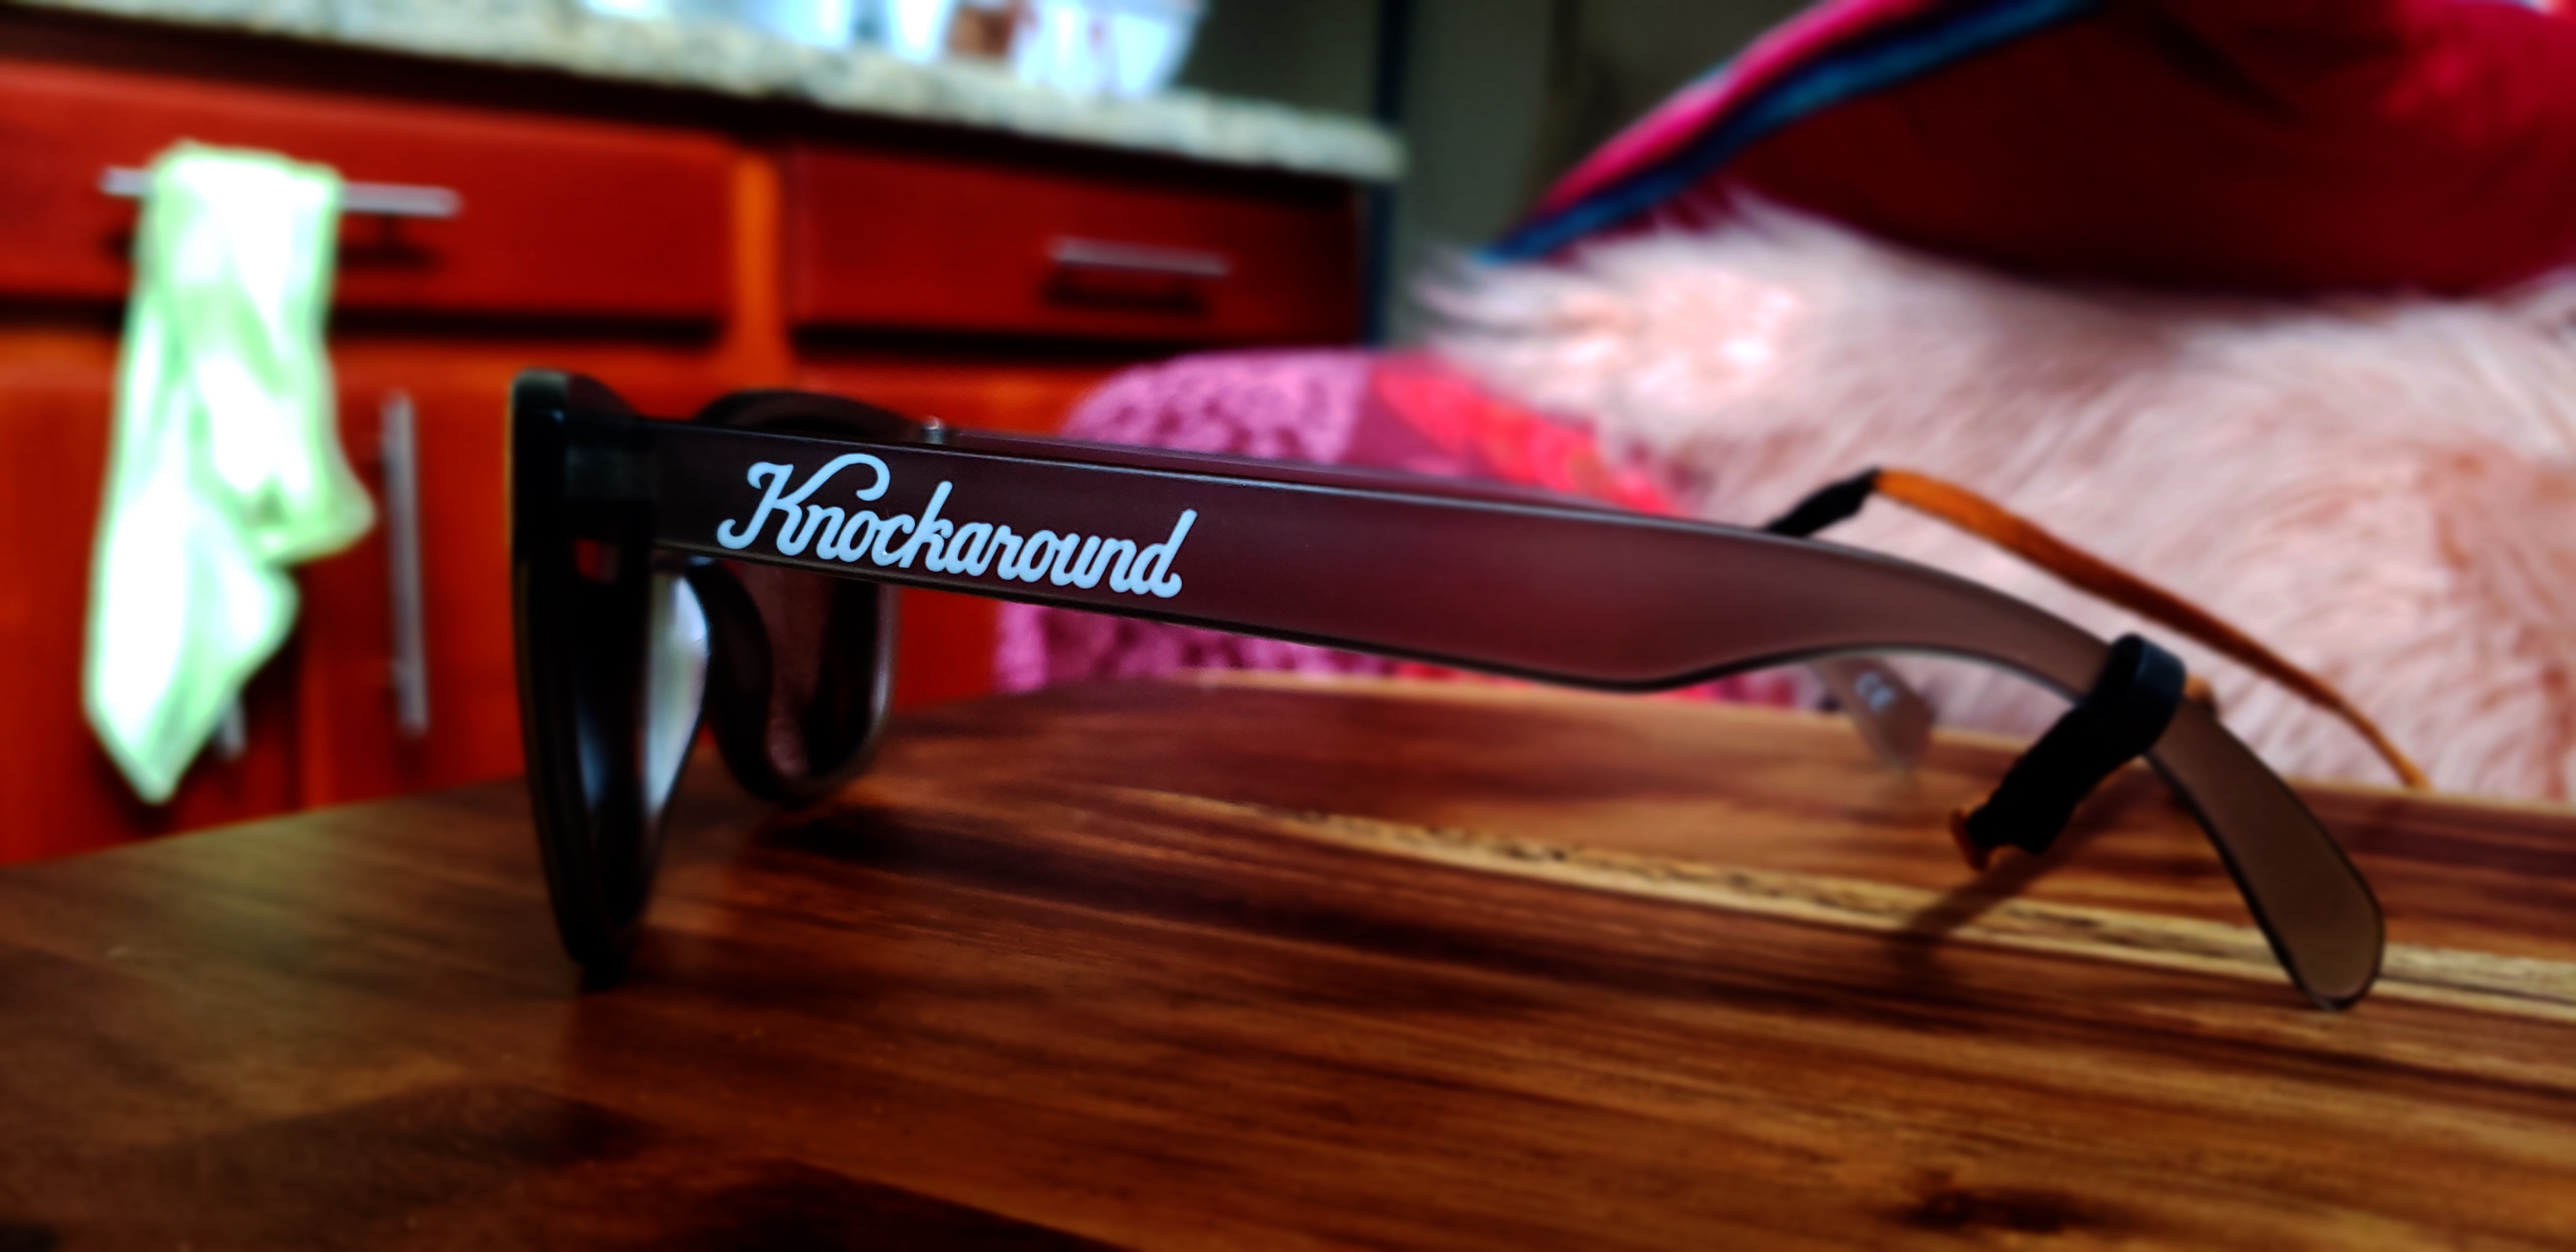 Knockaround Sunglasses Review: How Much Can You Really Knock 'em Around?